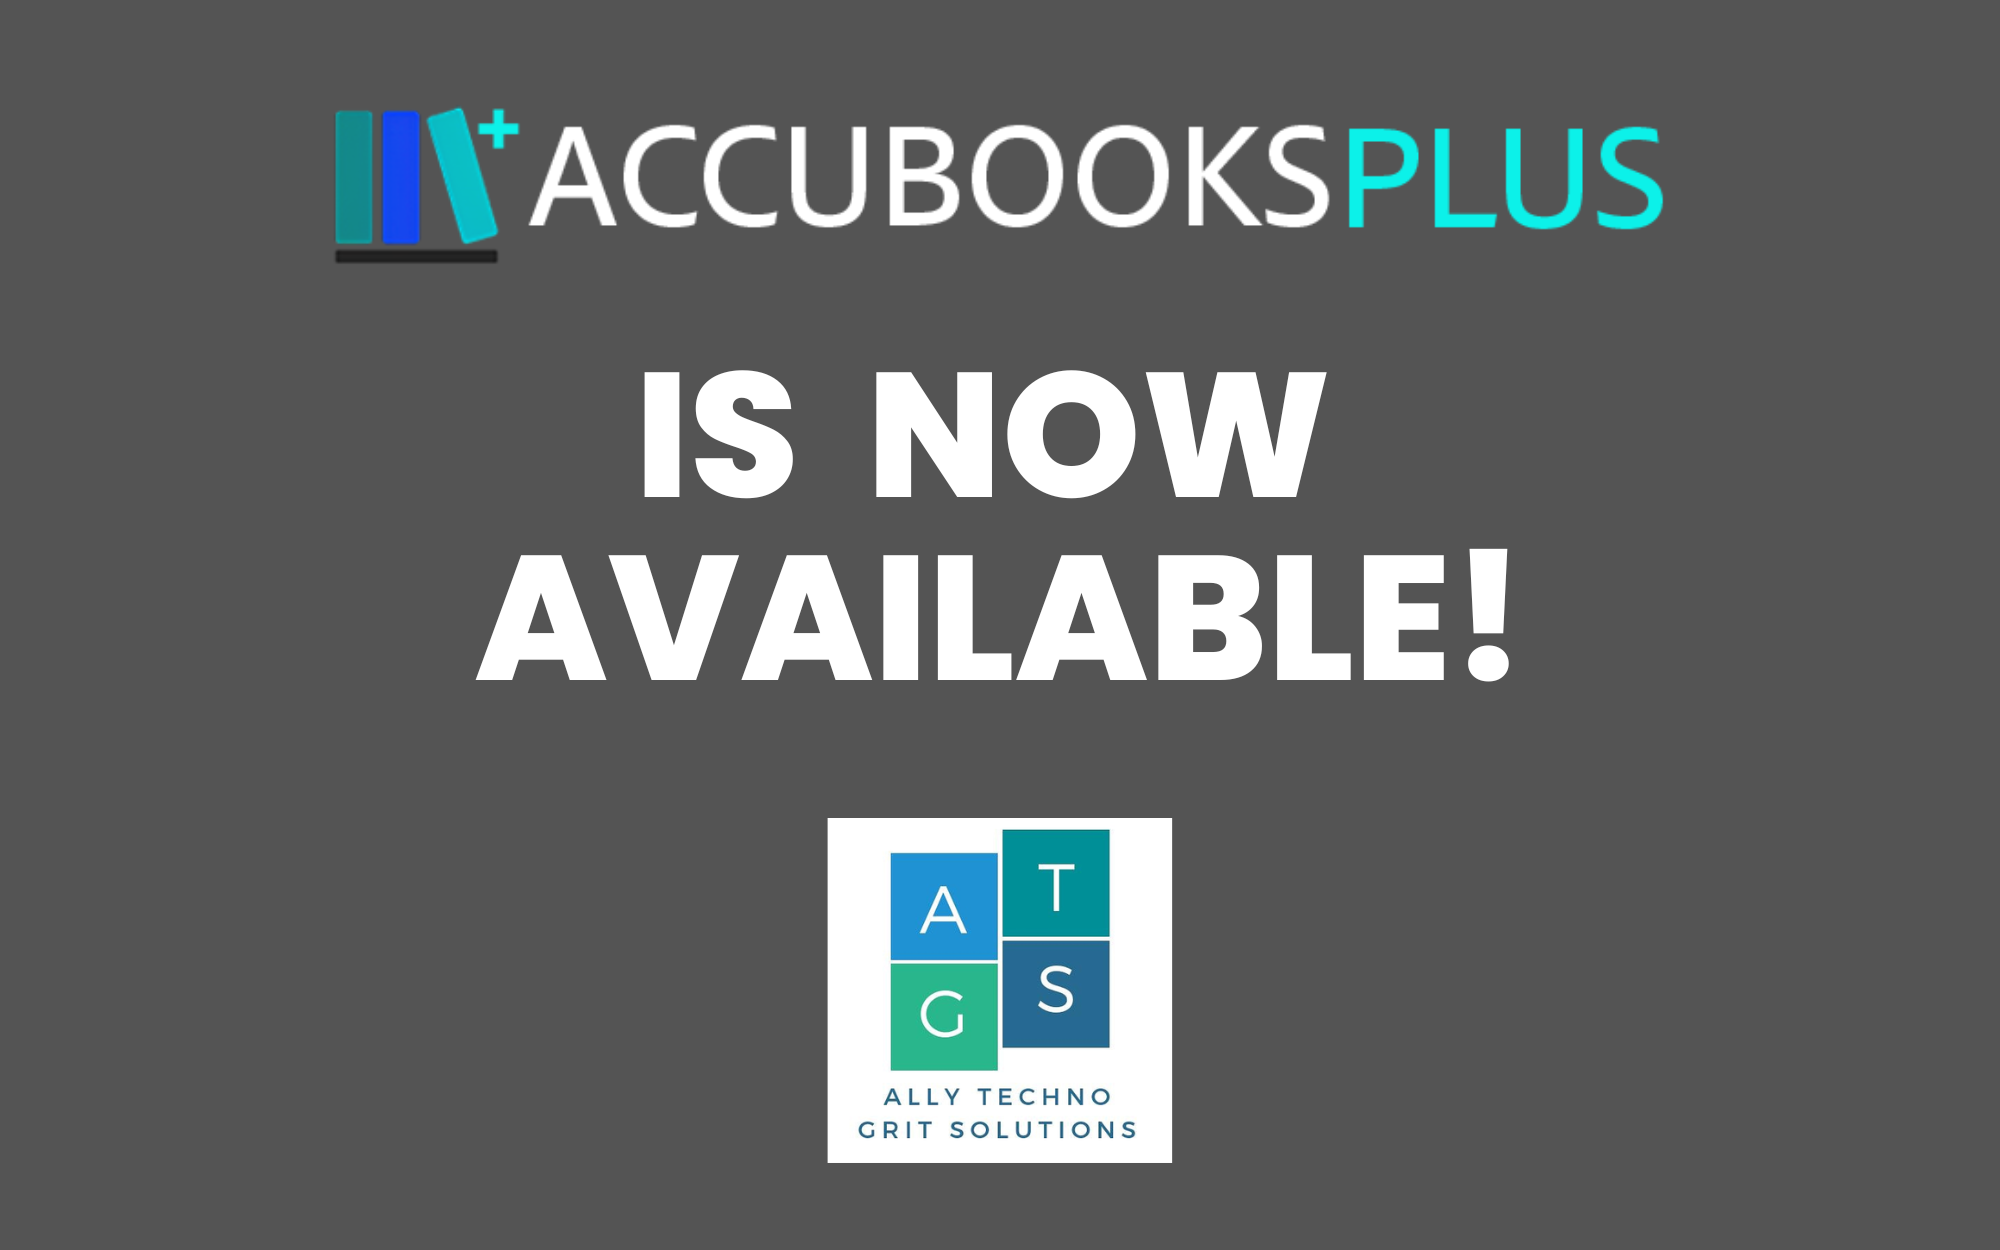 accubooks-is-now-available-1-1683179150.png?0.46000034301560766?0.8729745709013603?0.7326196445758082